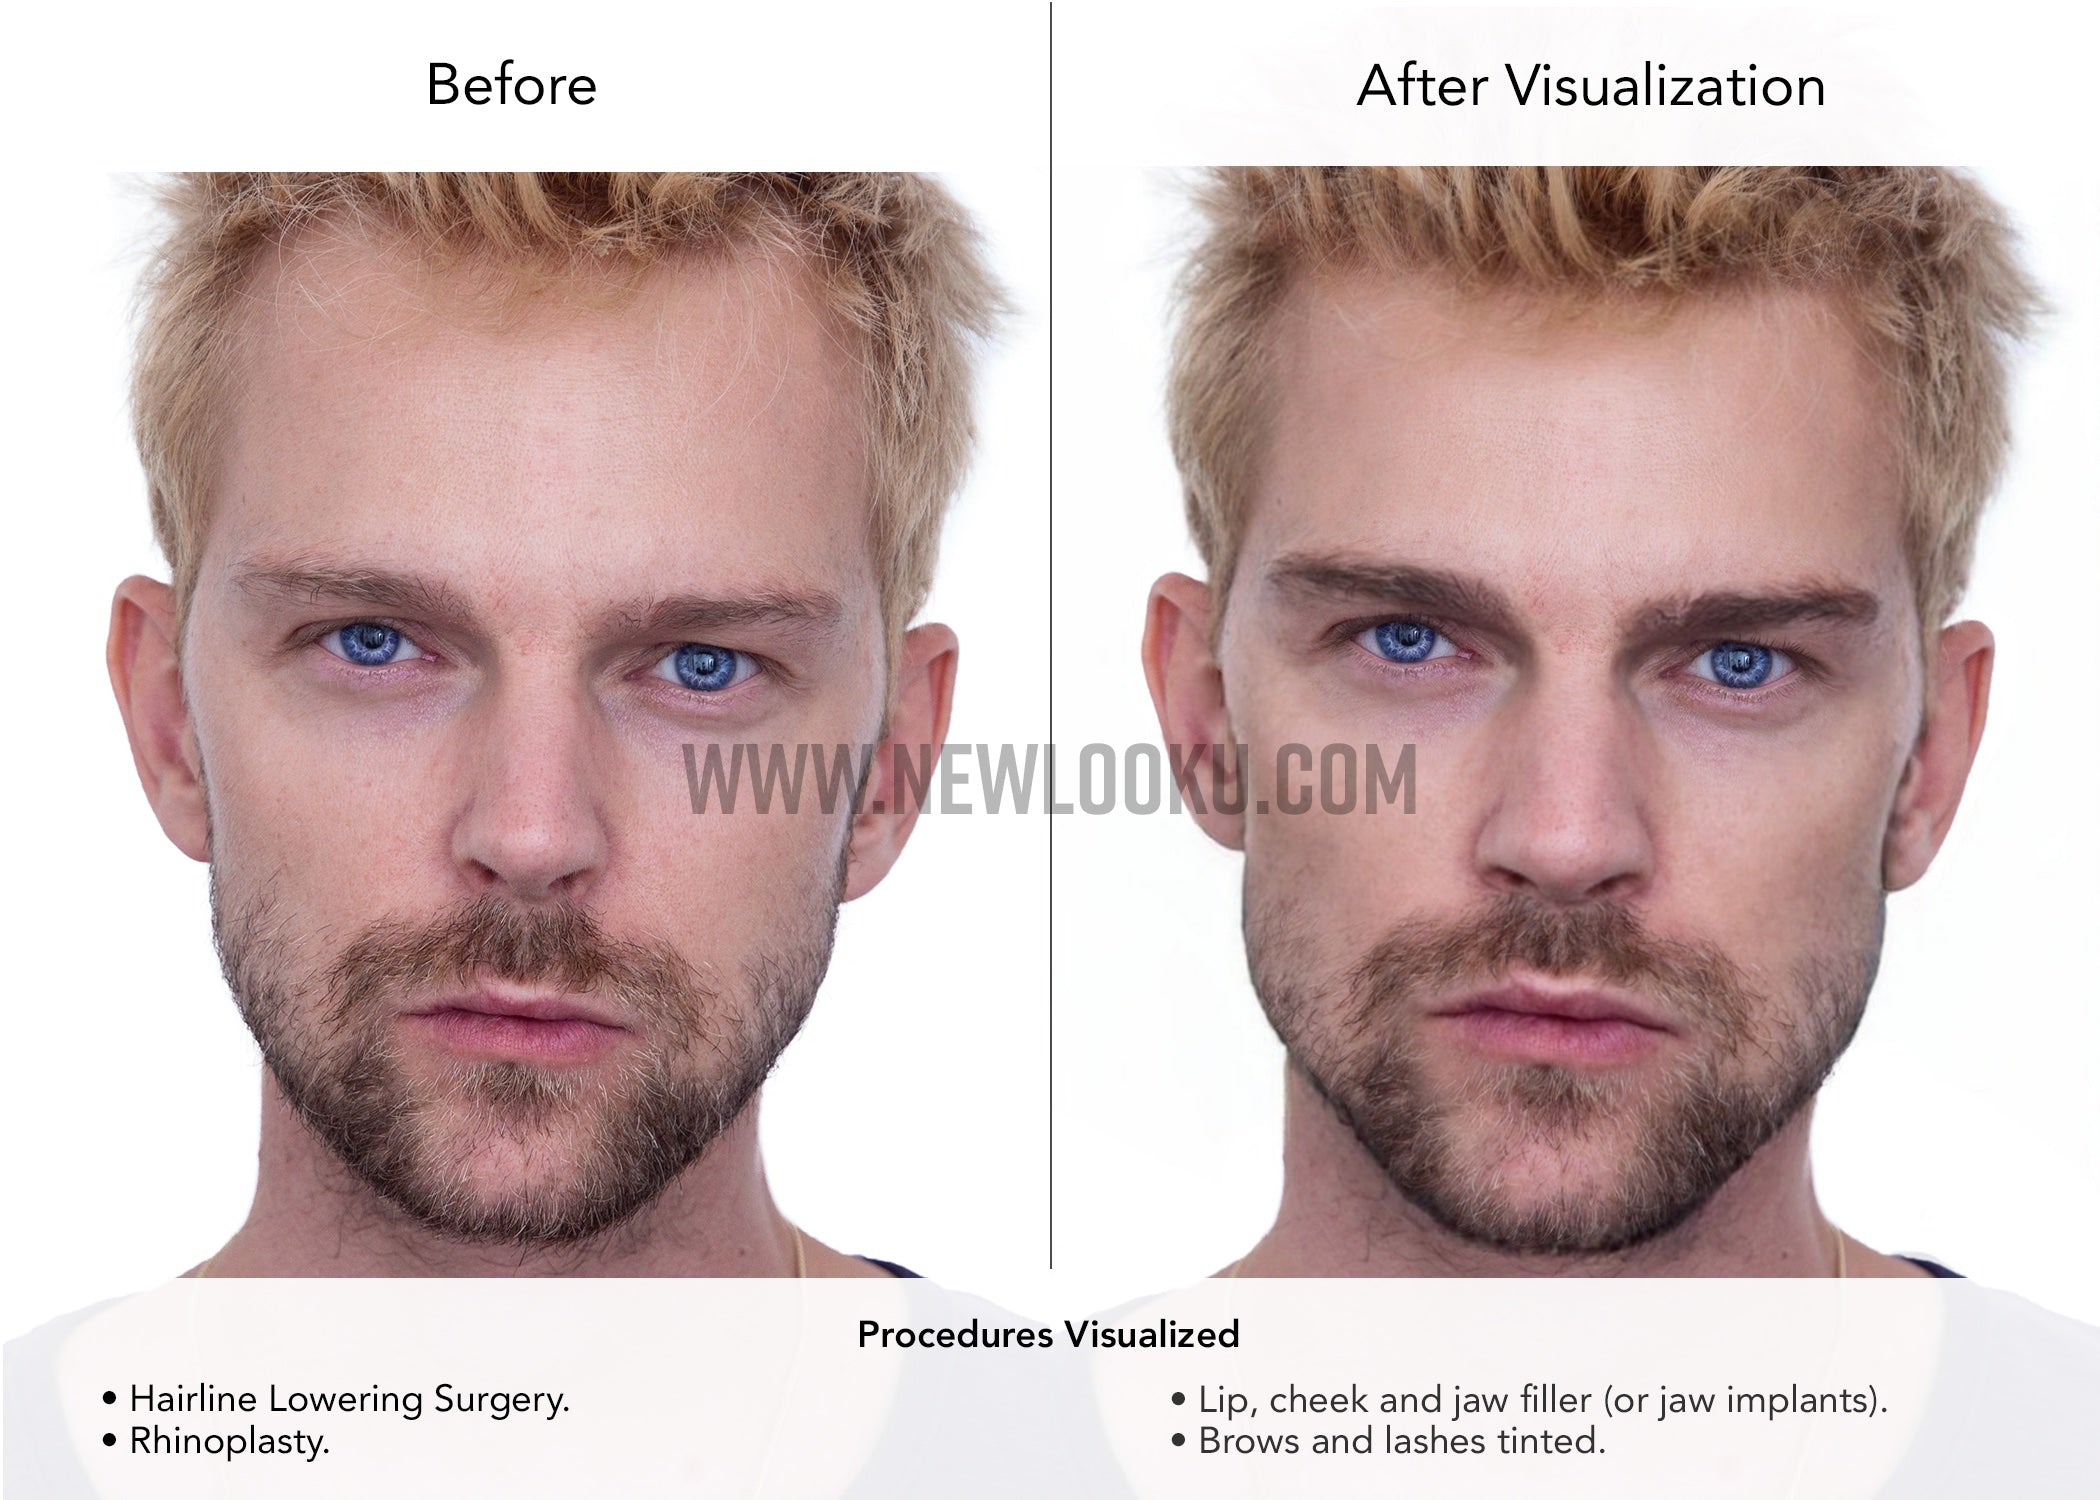 Male Plastic Surgery Visualization Before and After: Hairline Lowering Surgery. Rhinoplasty. Jaw implants (or possibly jaw filler). Lip and cheek filler (or fat transfer).